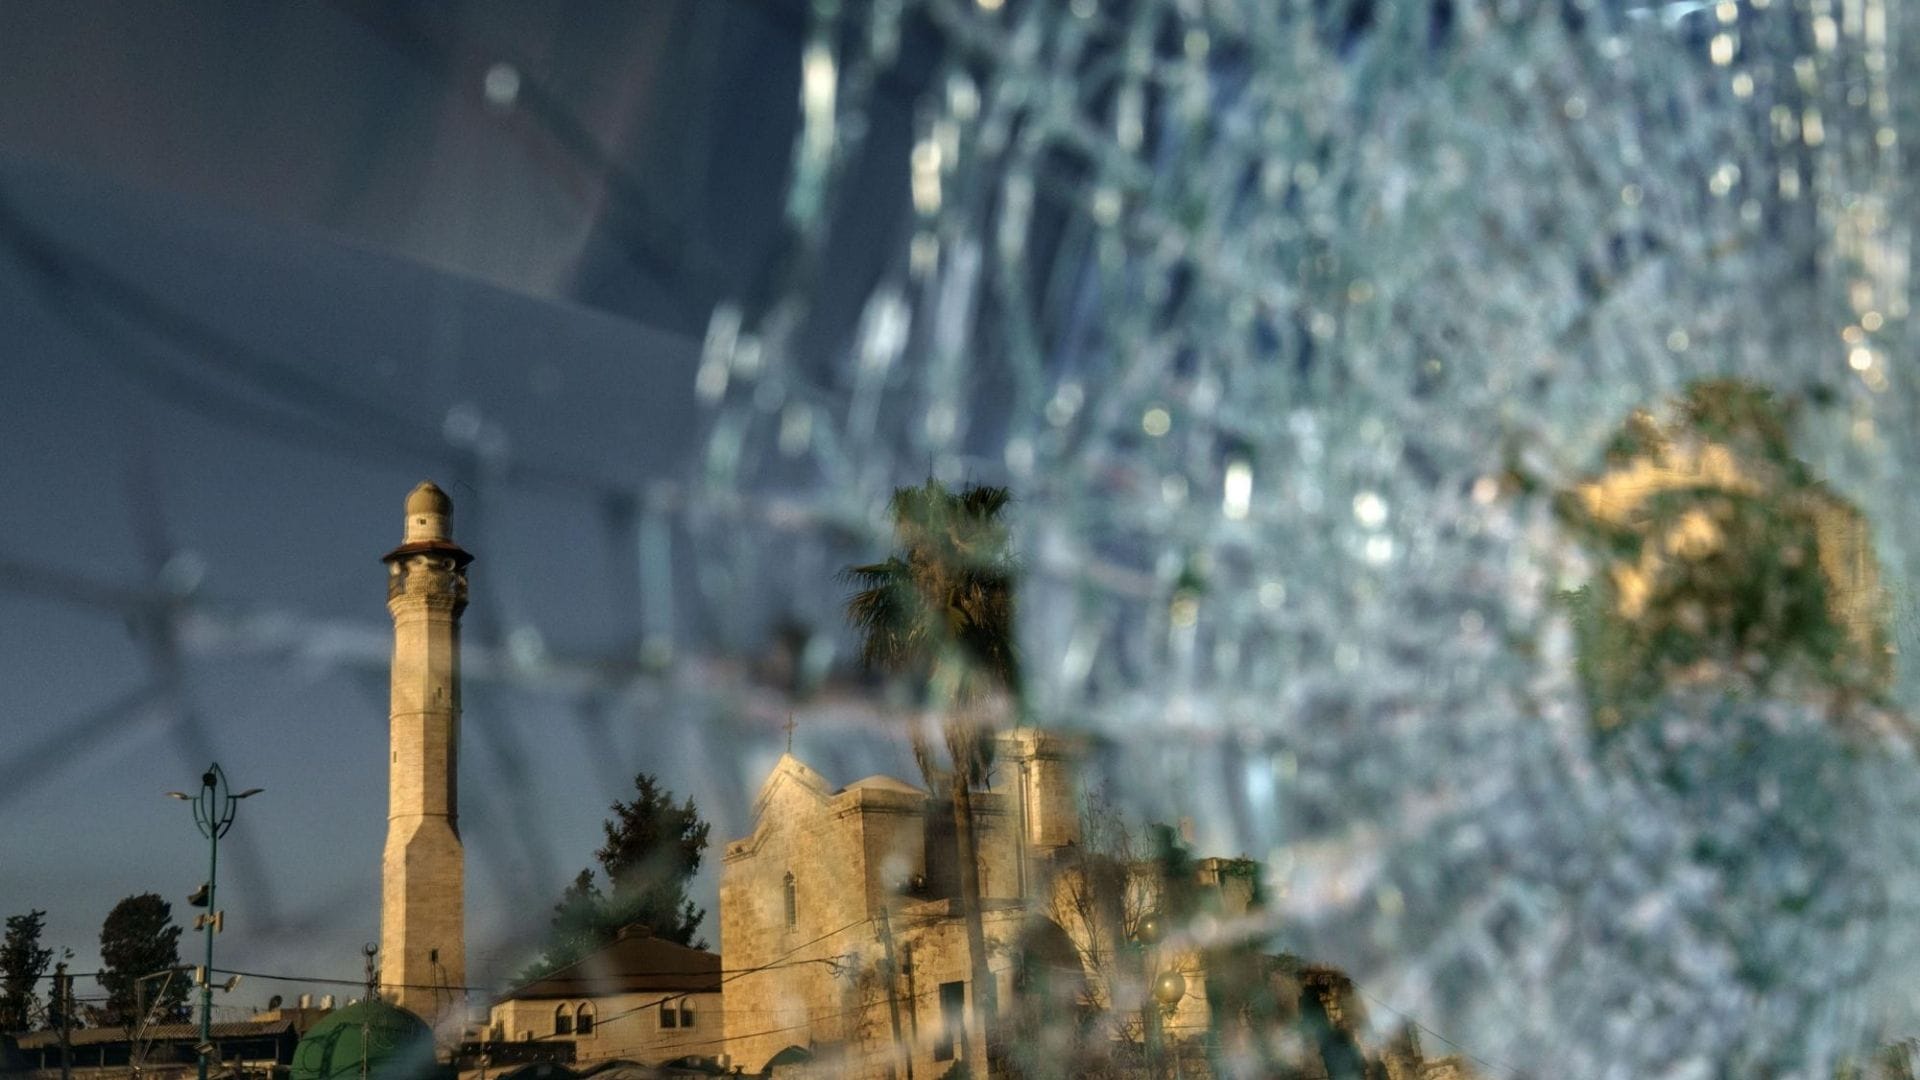 In Israel's mixed Jewish-Arab cities, communities find themselves on edge after war, violence